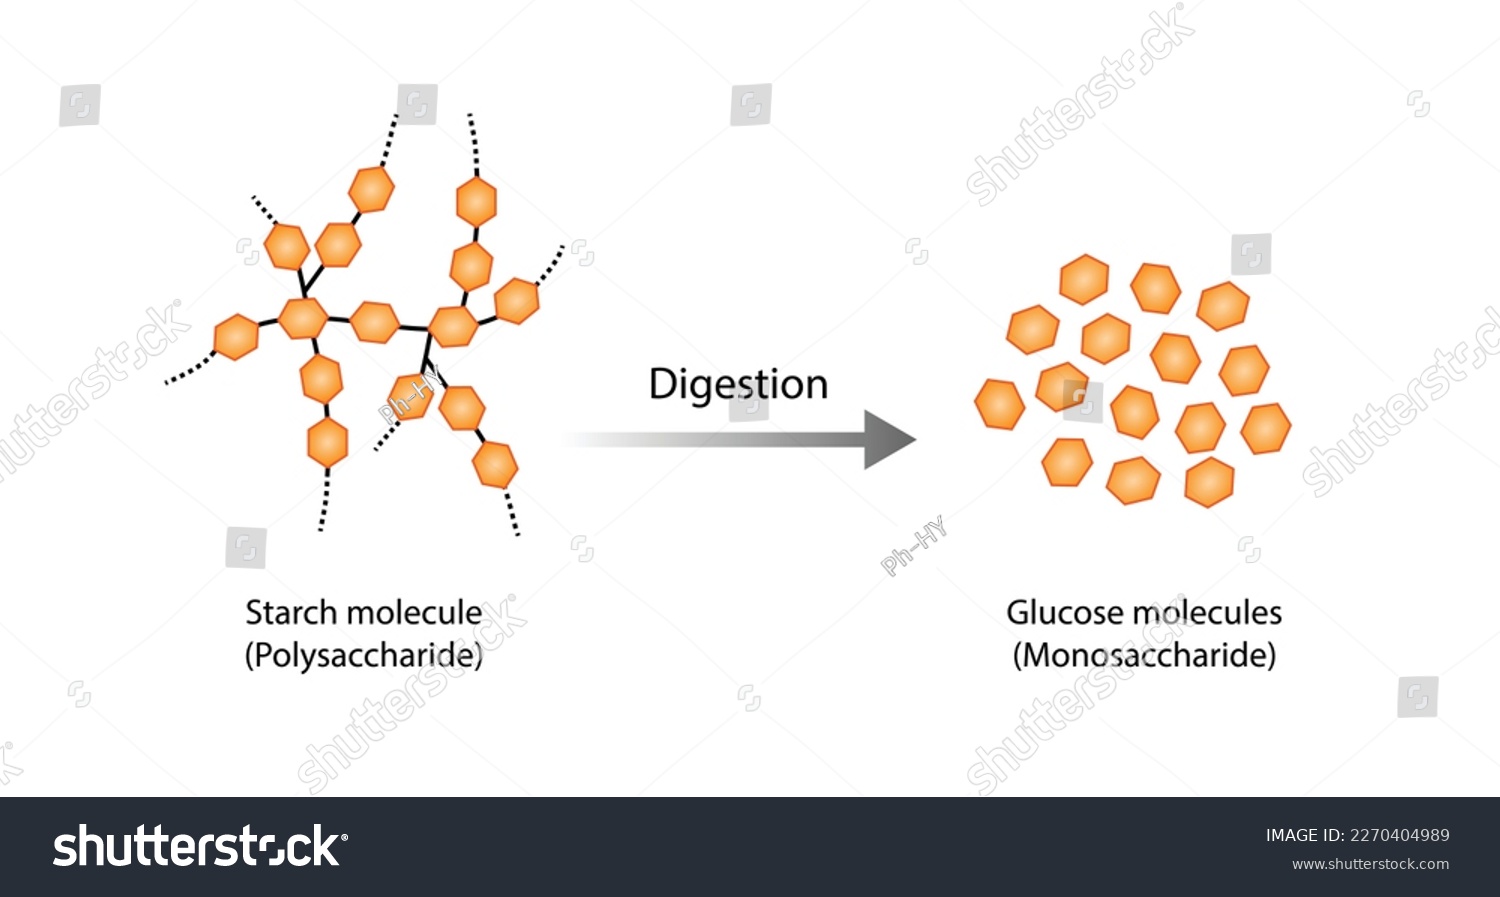 SVG of Carbohydrates Digestion. Amylase and Maltase Enzymes catalyze Polysaccharide Starch Molecule to Disaccharides and Monosaccharide, glucose Sugar Formation. Scientific Diagram. Vector Illustration. svg